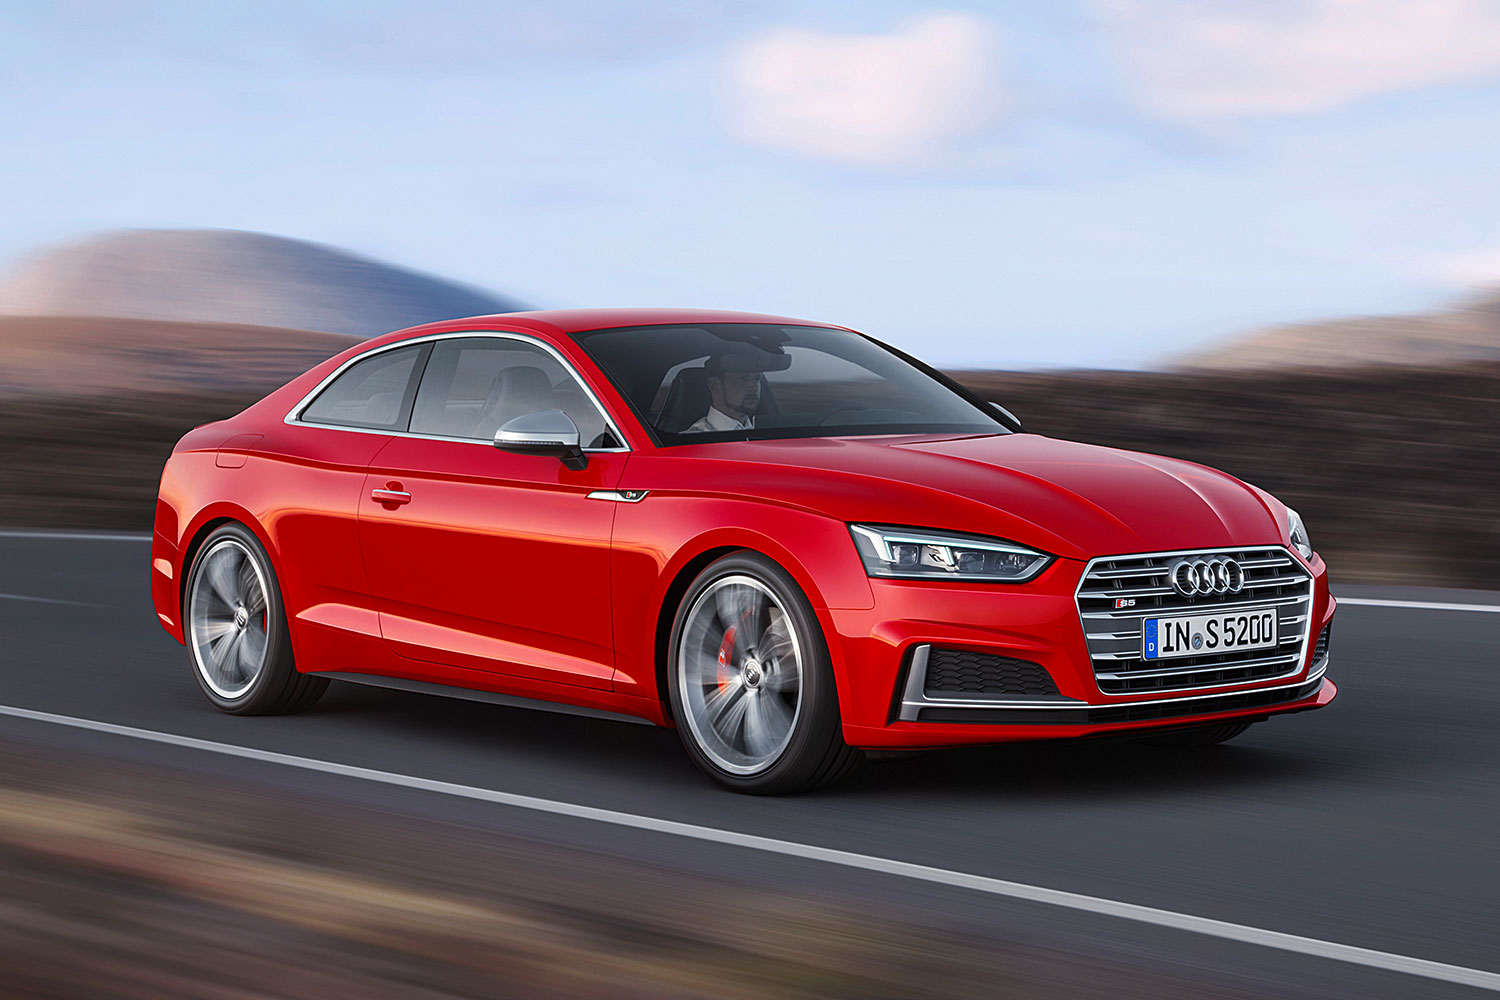 2017 audi a5 news pictures specs performance s5 coupe 0014